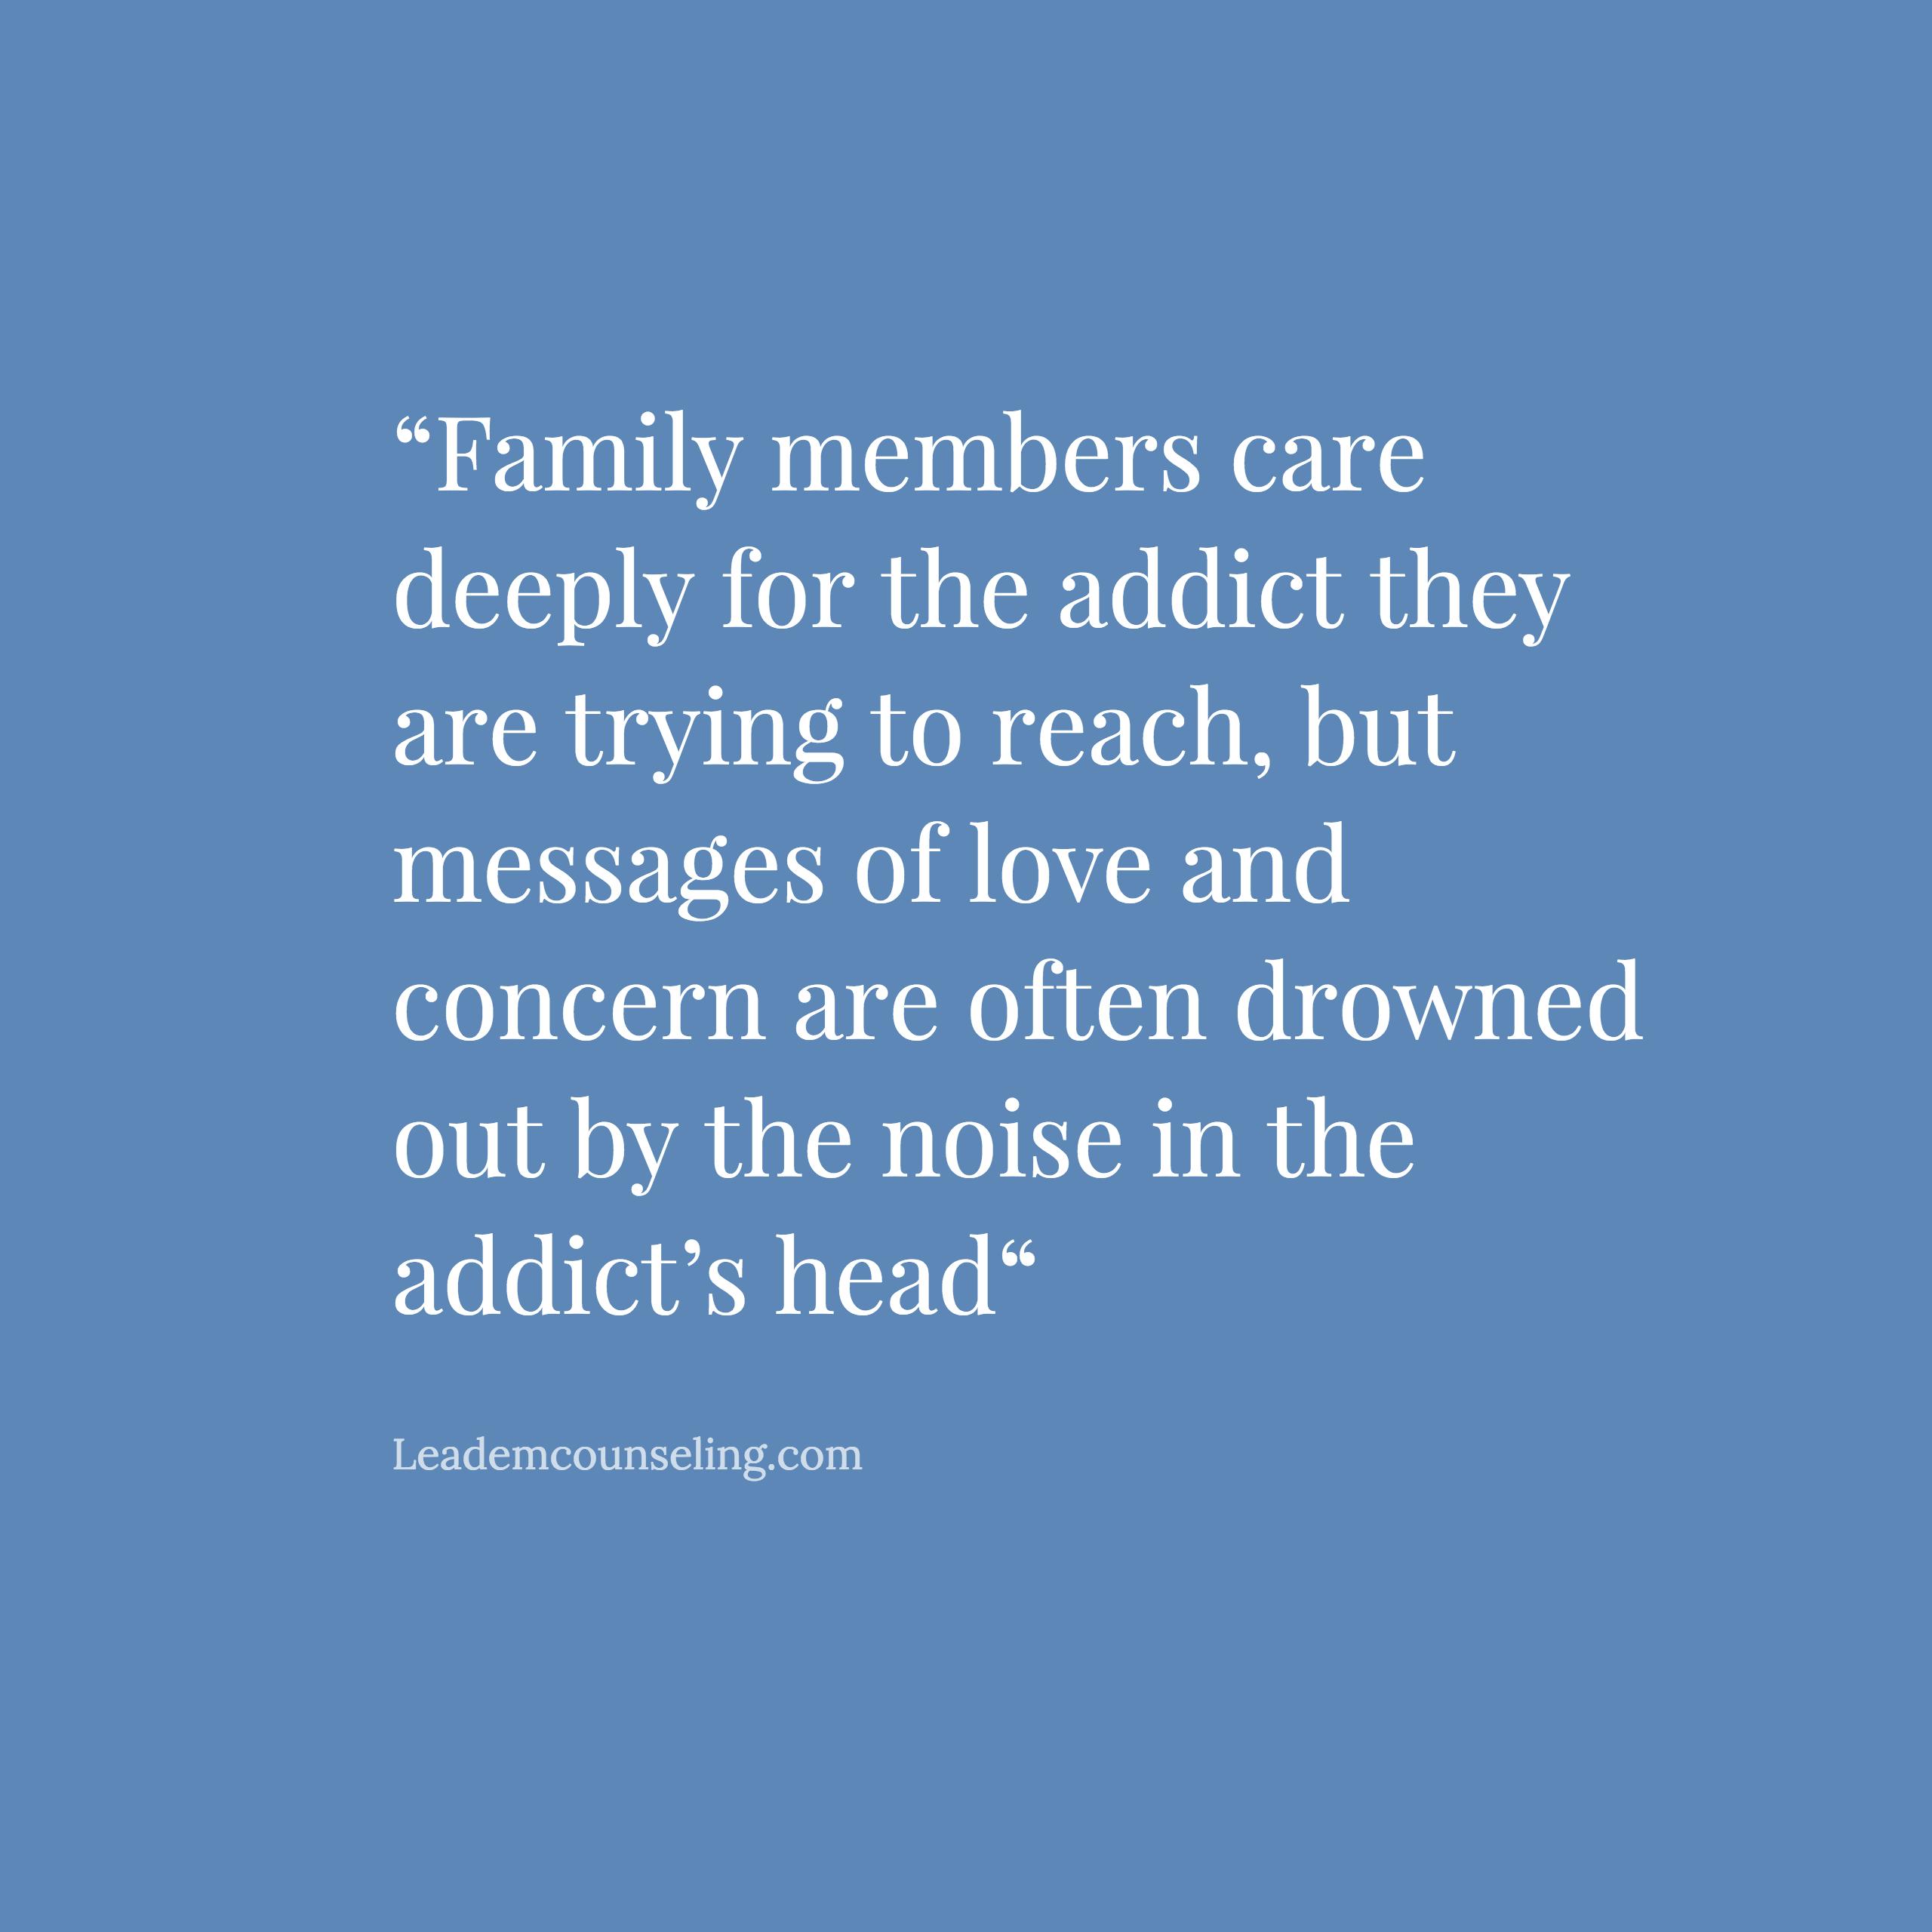 family members care deeply for the addict they are trying to reach, but messages of love and concern are often drowned out by the noise in the addict’s head